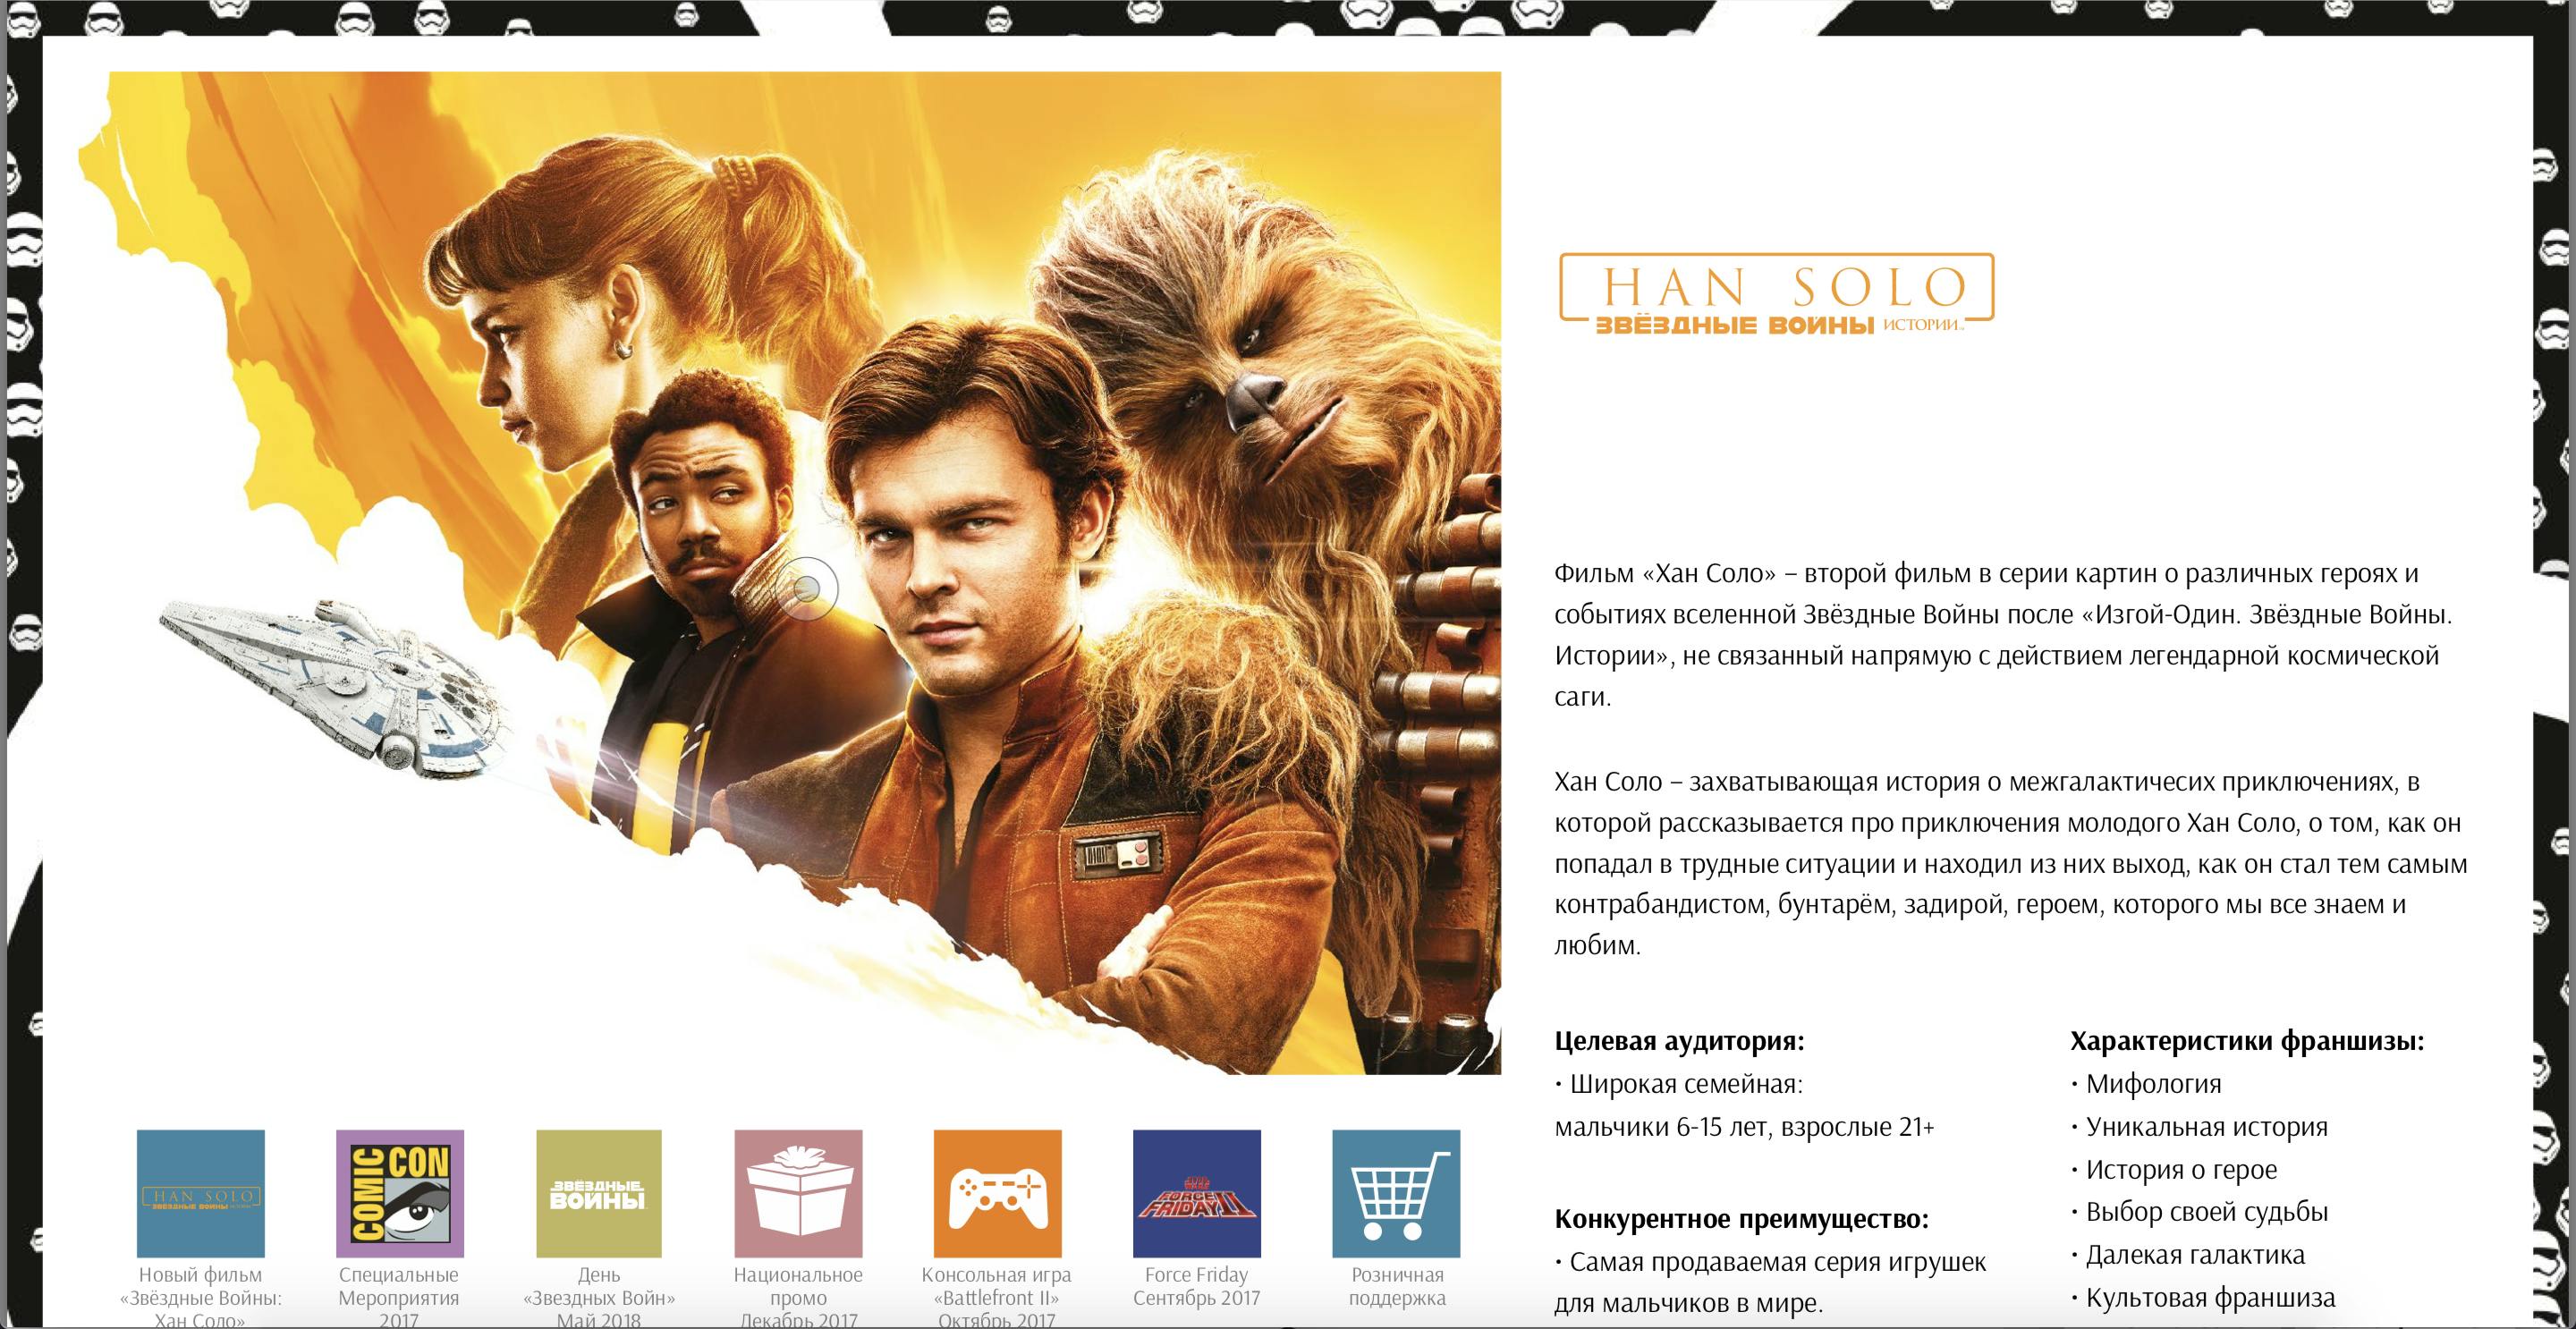 han solo synopsis russian